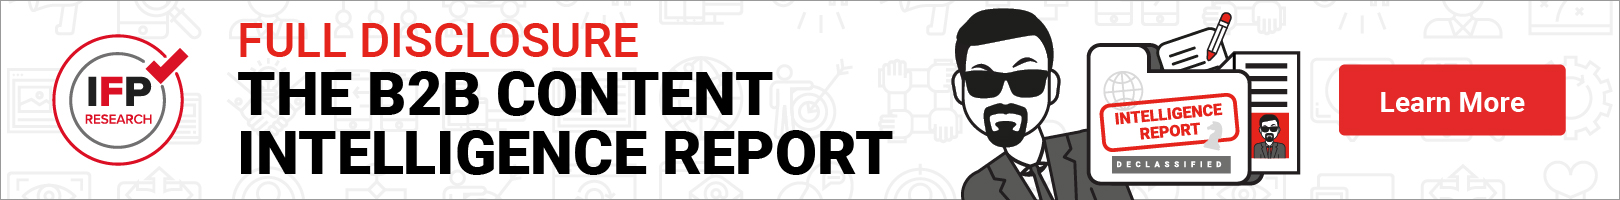 WP banner for research report